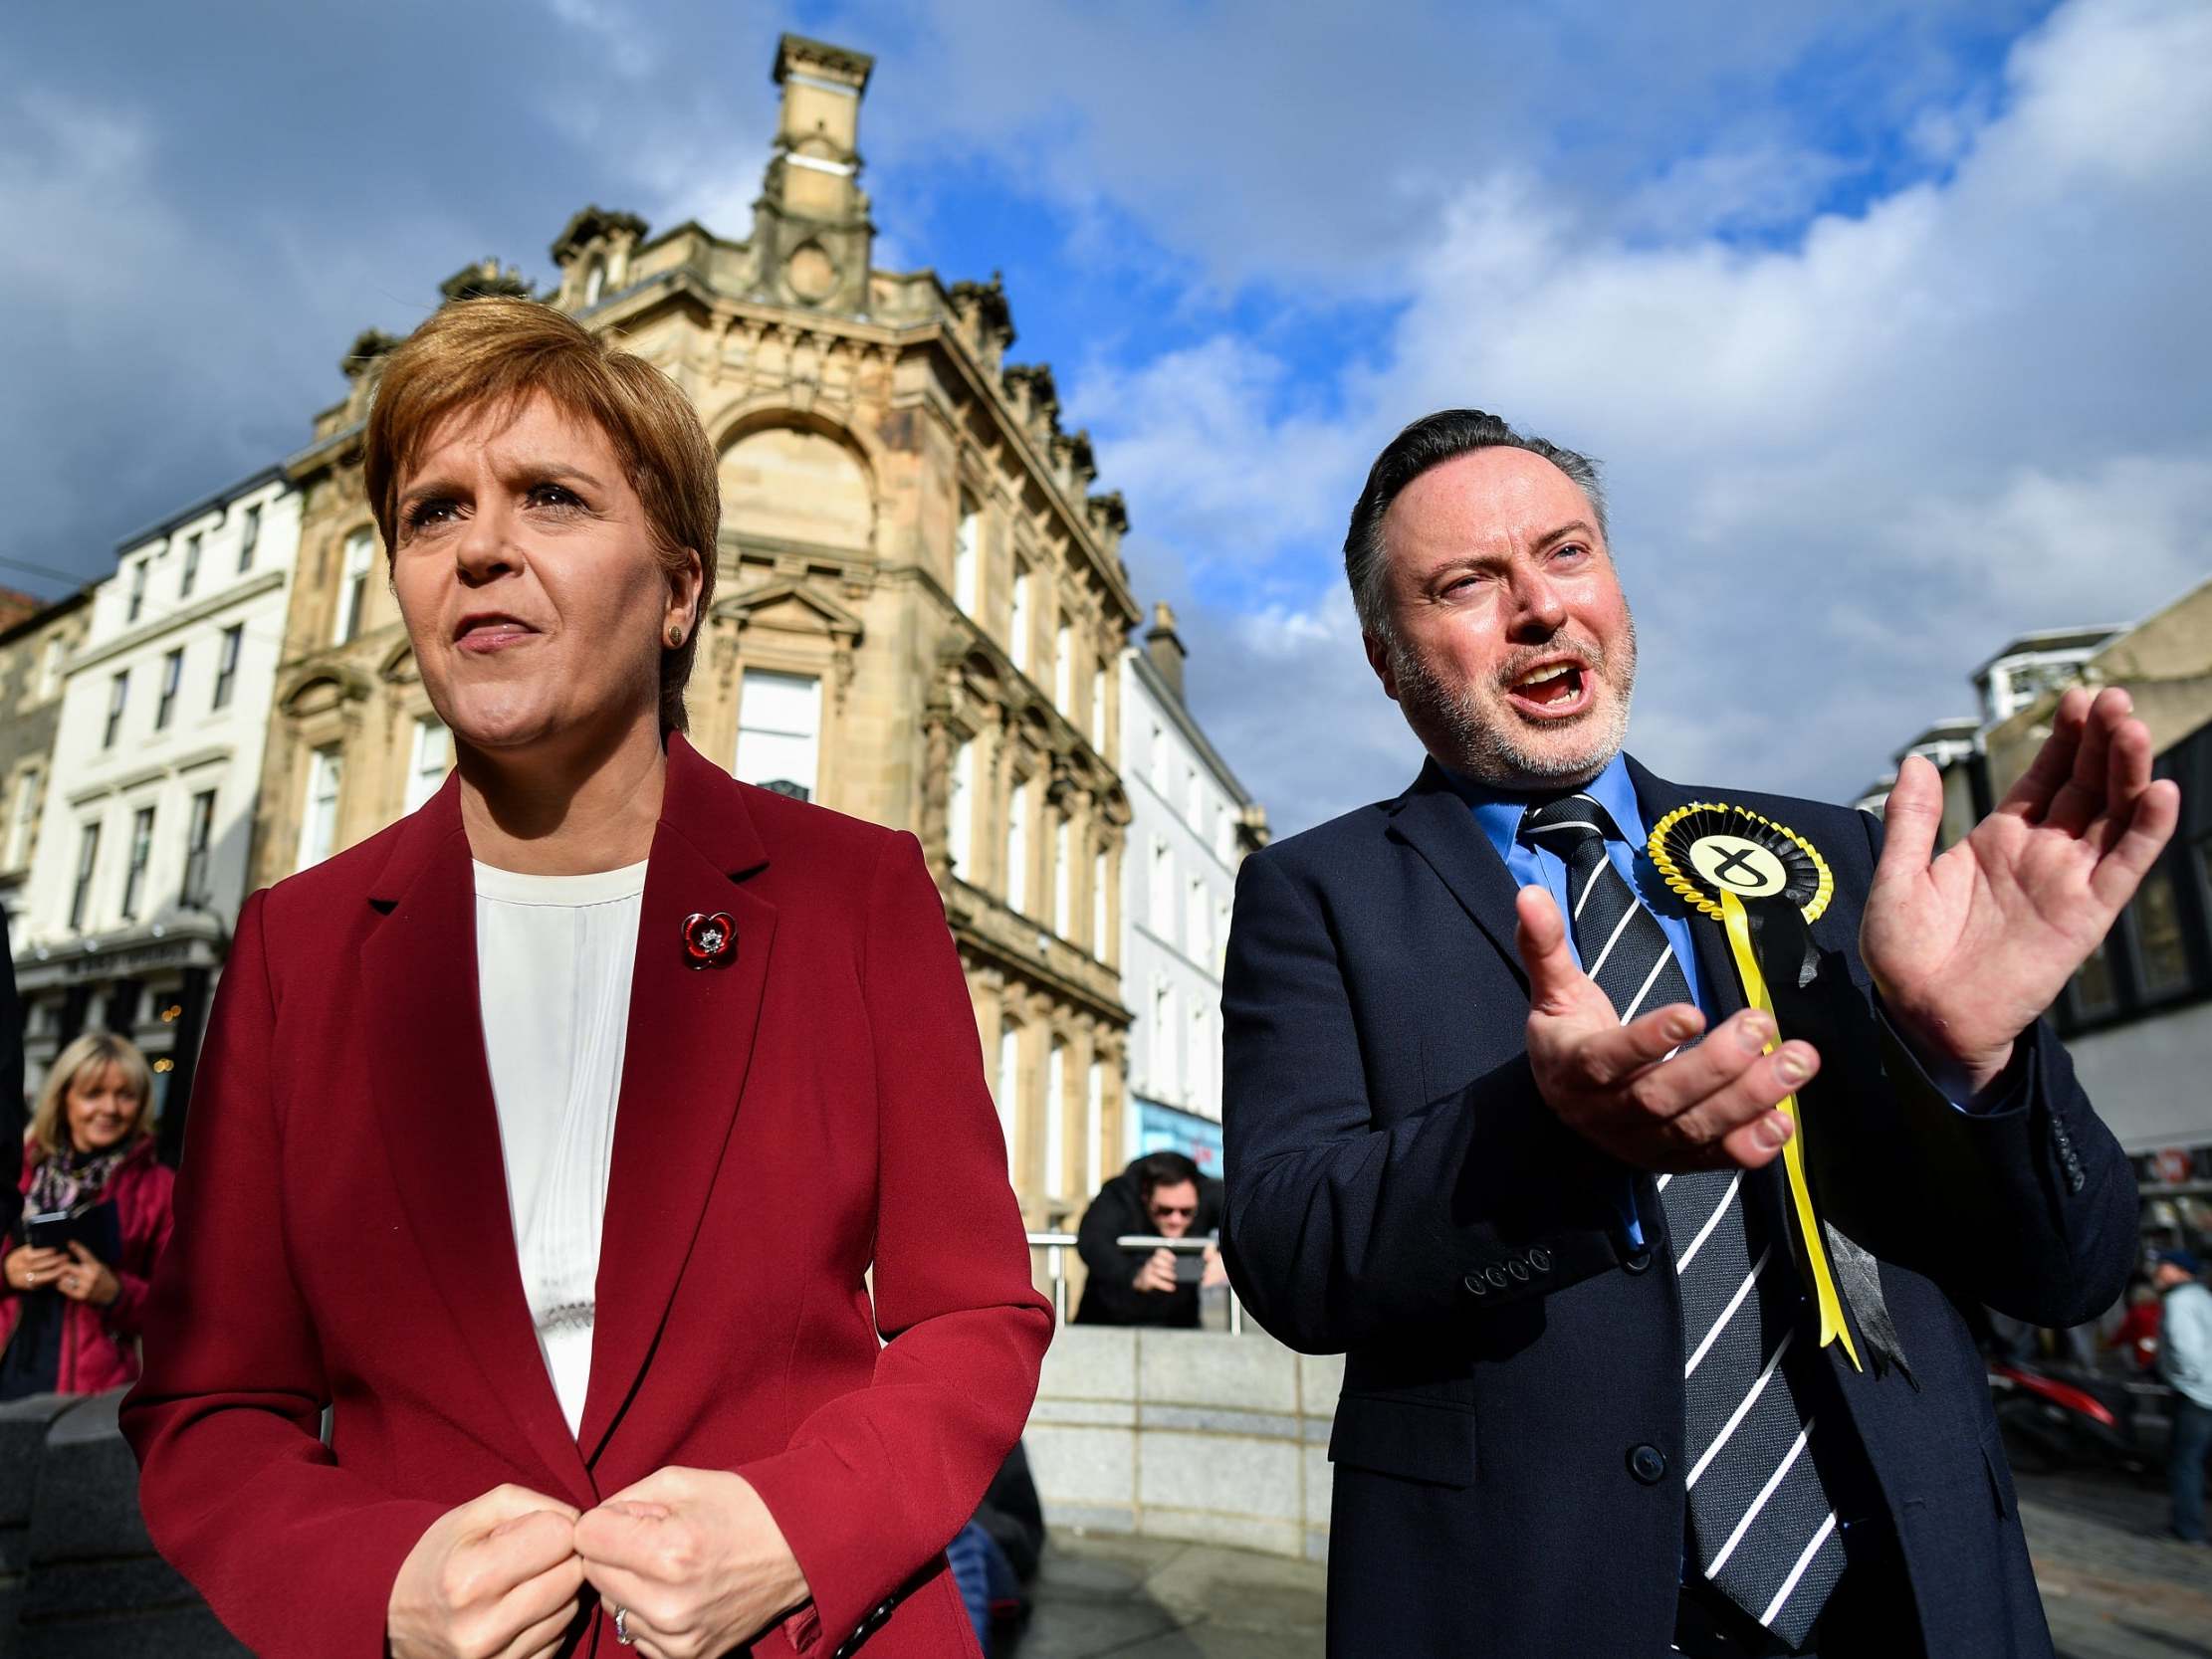 Indyref2 is not in the gift of Nicola Sturgeon, the SNP first minster